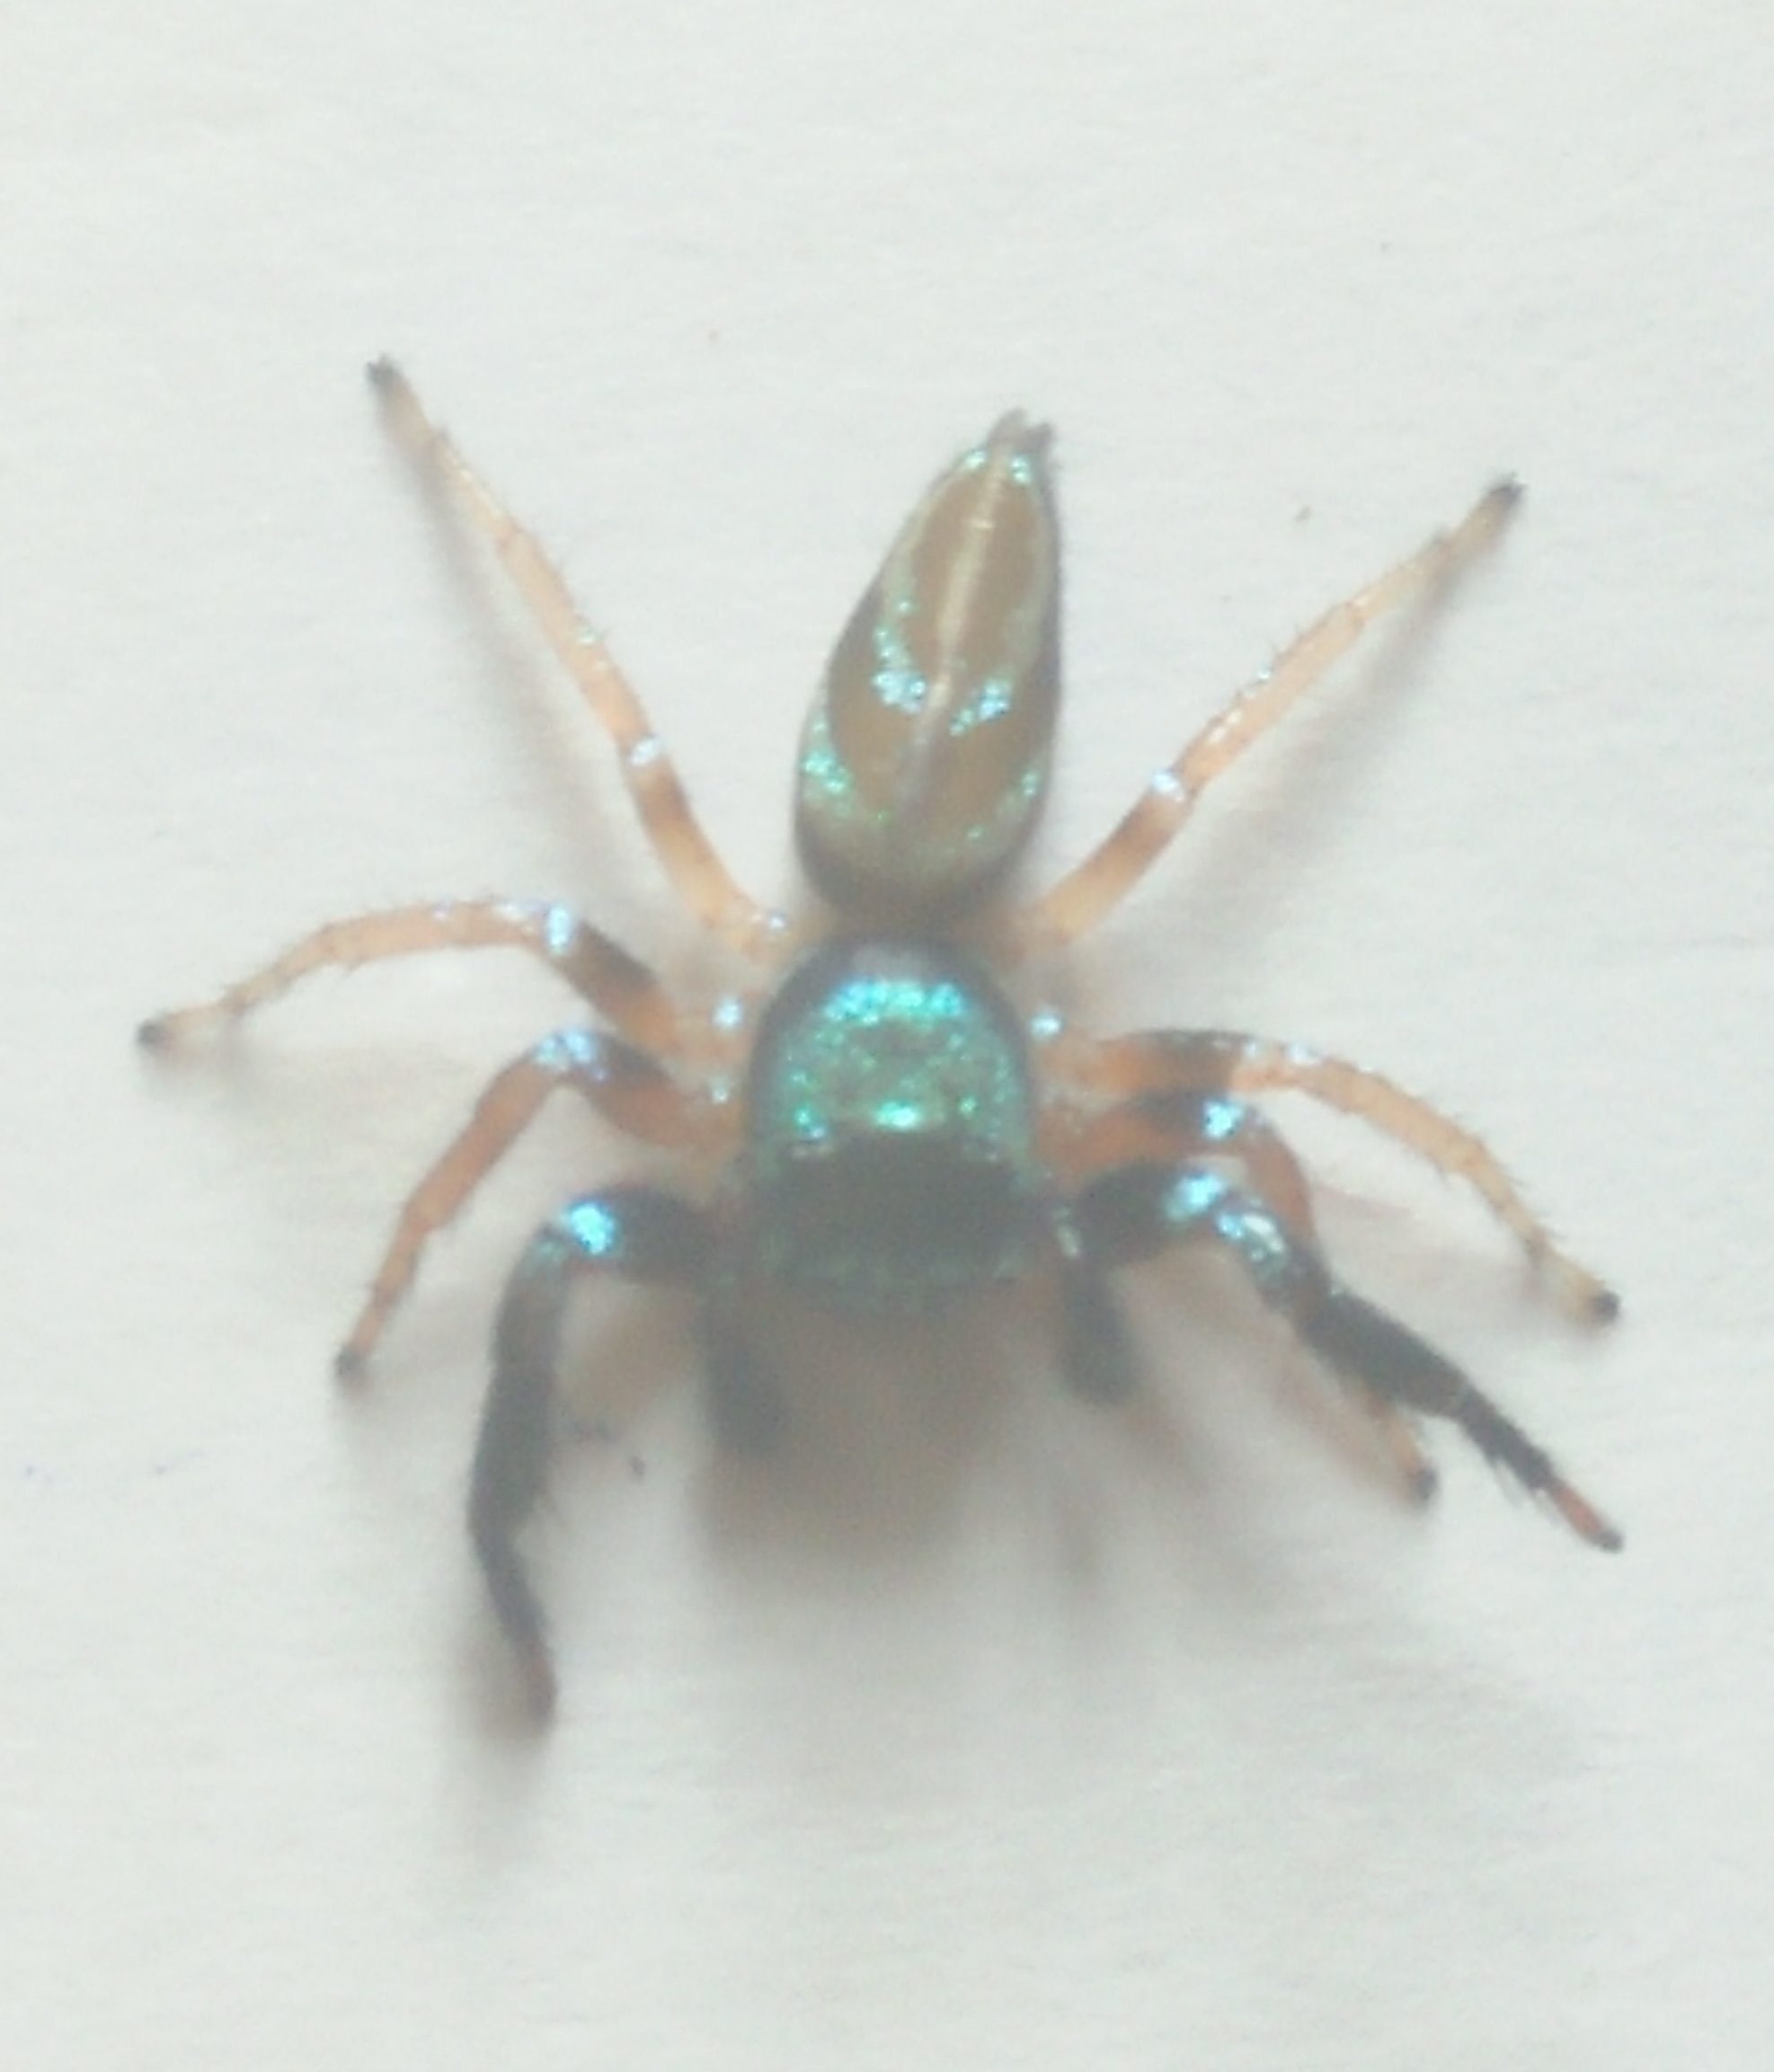 Picture of Thiania bhamoensis (Fighting Spider) - Male - Dorsal